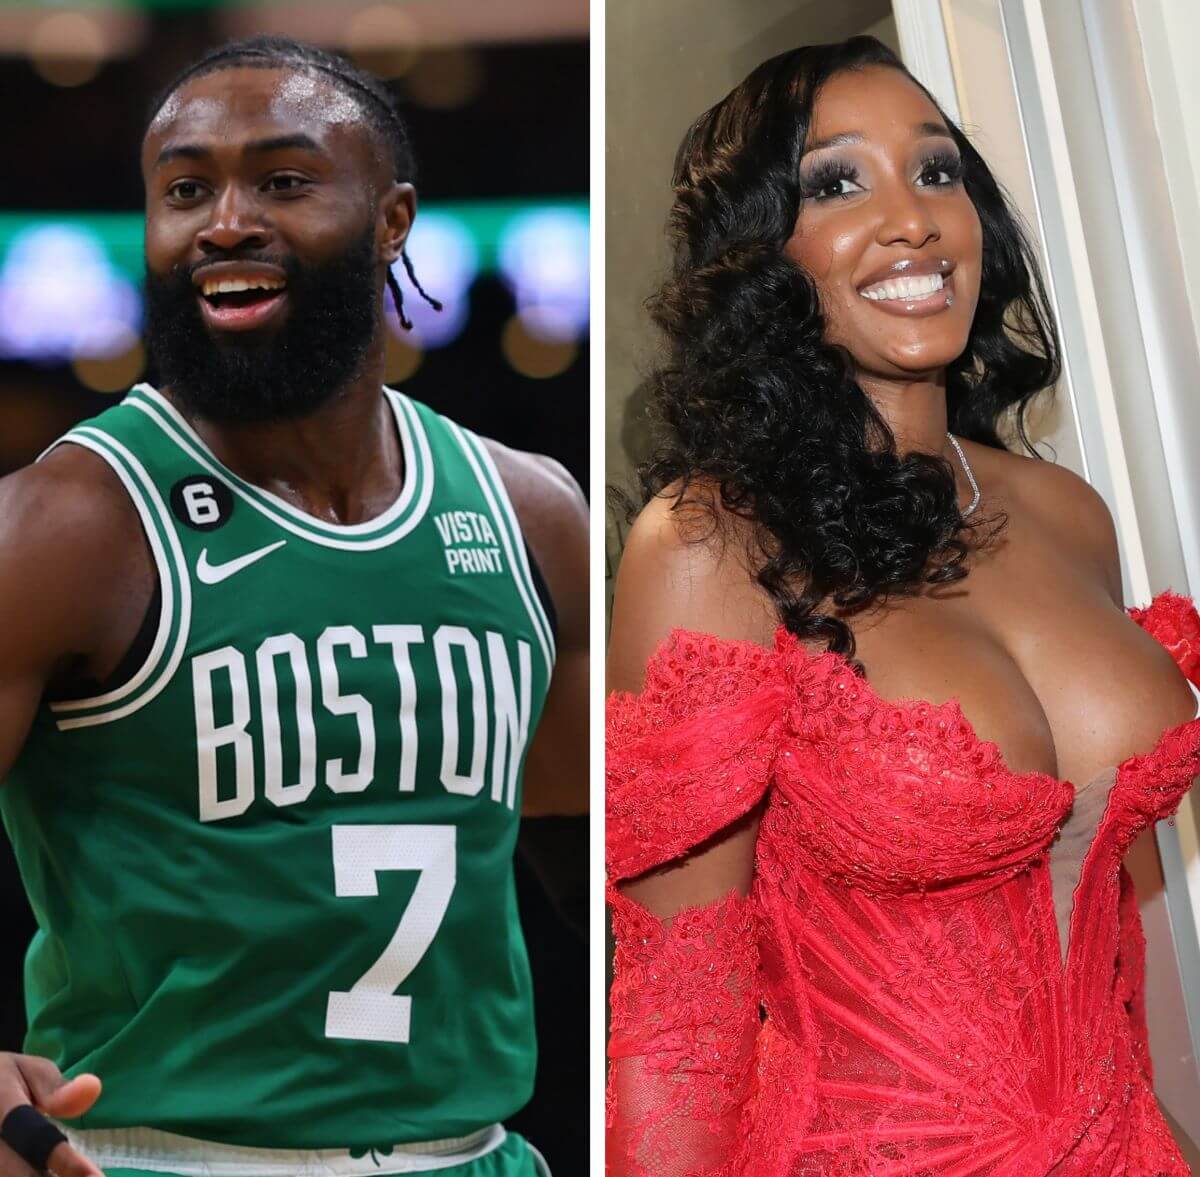 (L) Jaylen Brown reacts during game against the Miami Heat, (R) Bernice Burgos smiles during her birthday party in Fort Lee, New Jersey 